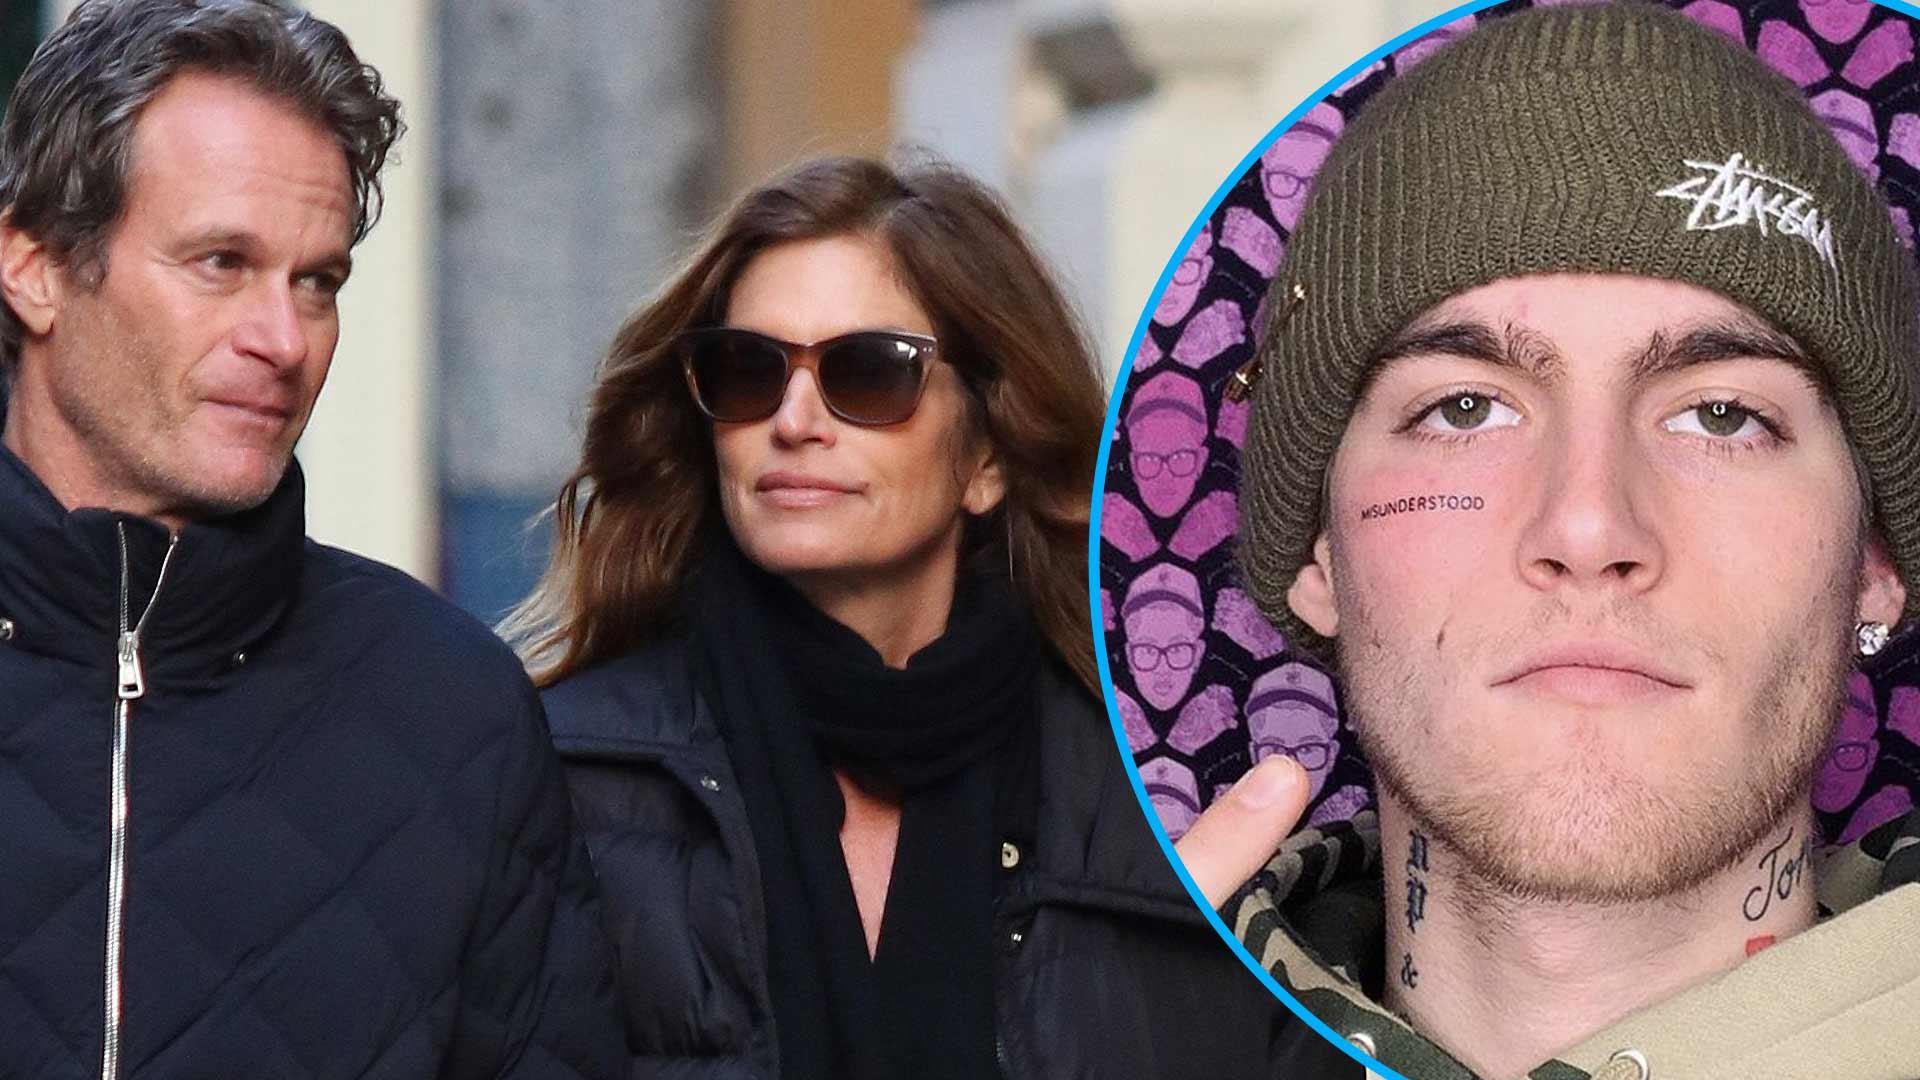 Cindy Crawford Wants Son Presley Gerber To Get Help After ‘MISUNDERSTOOD’ Face Tattoo